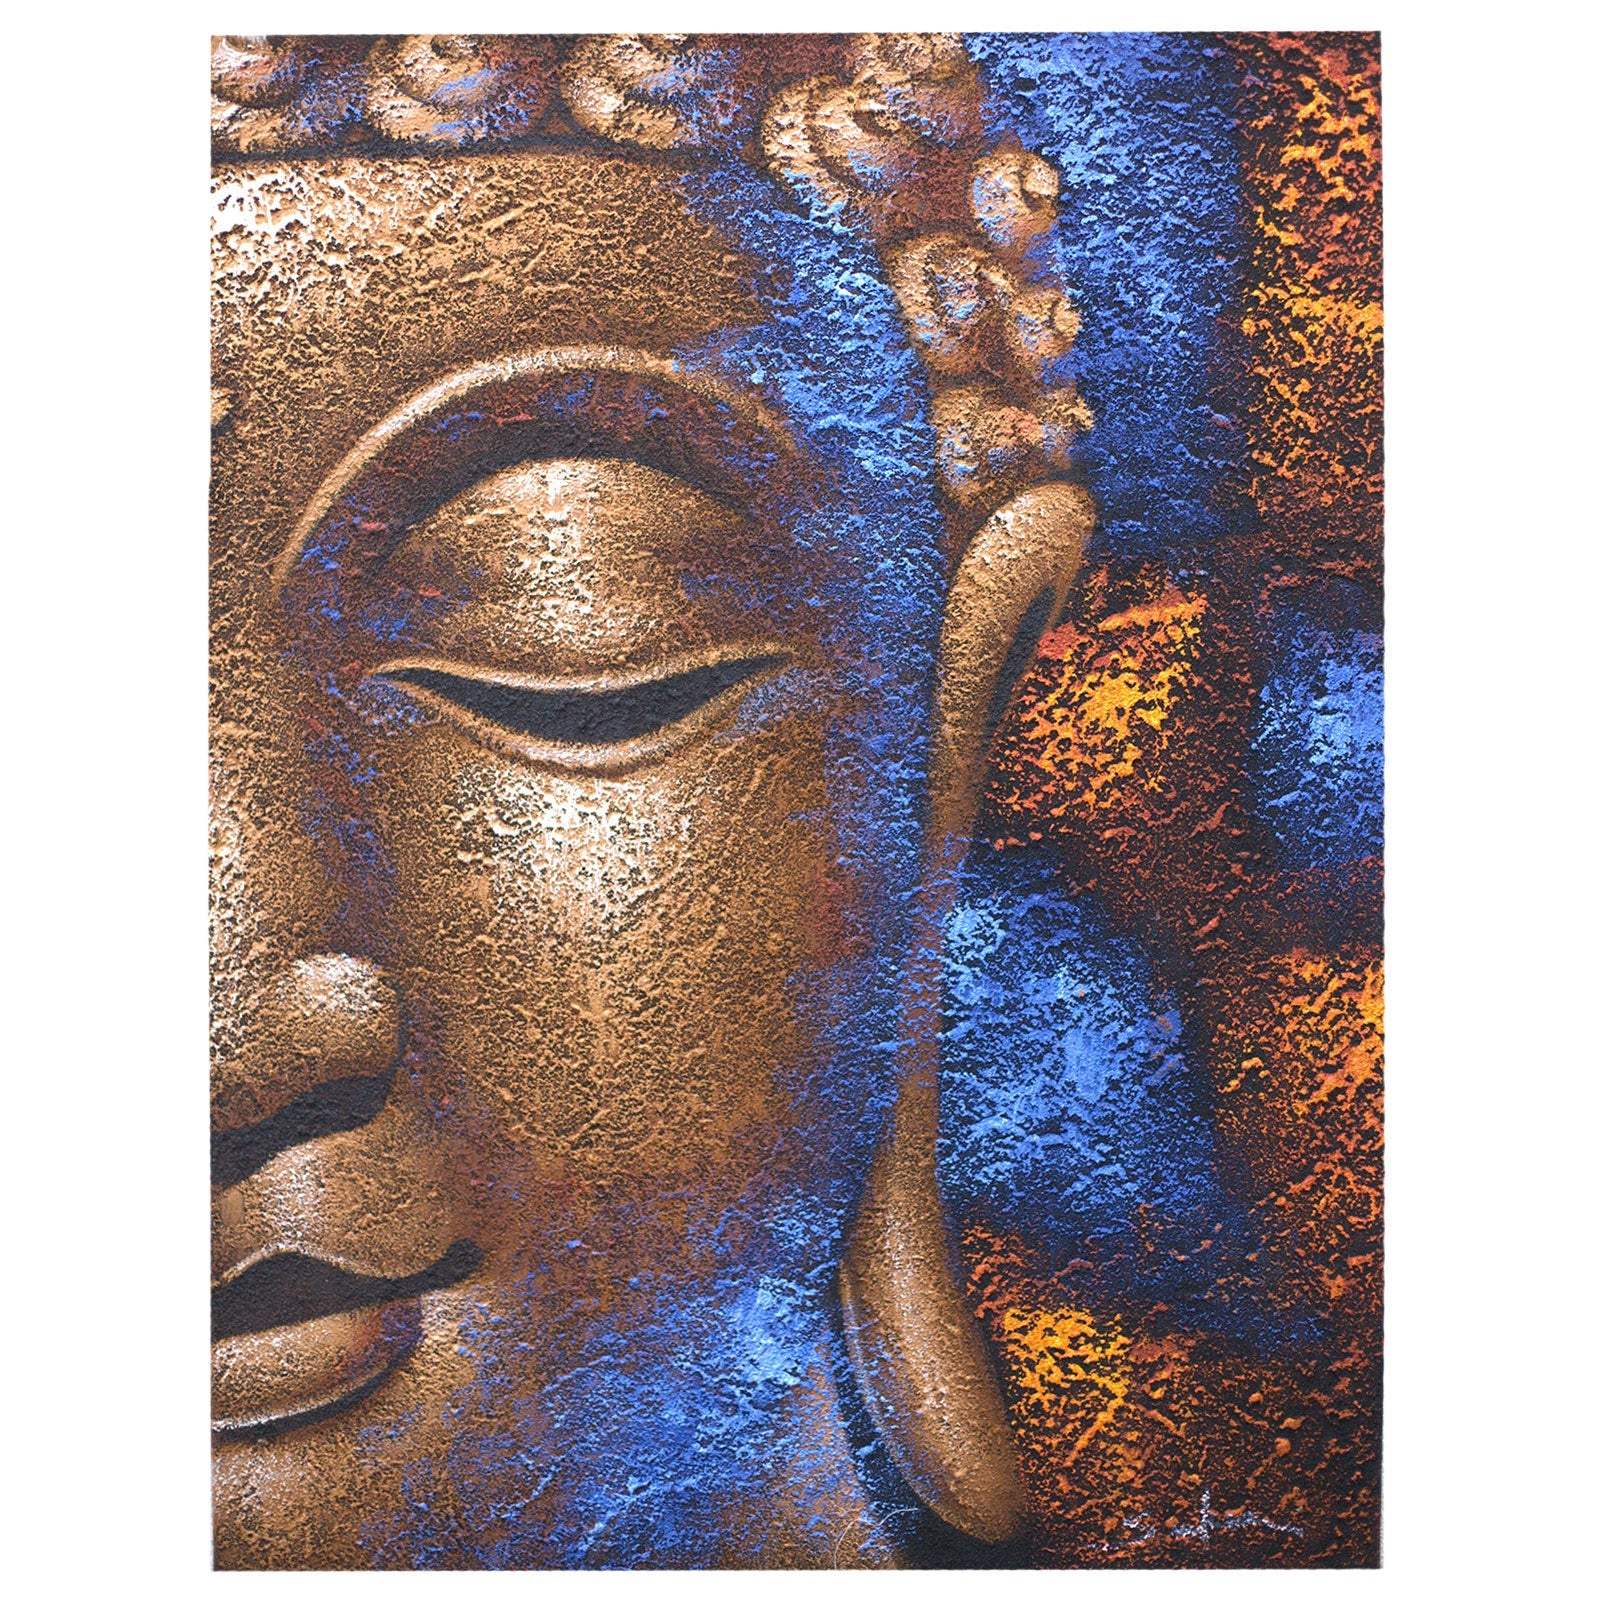 View Buddha Painting Copper Face information